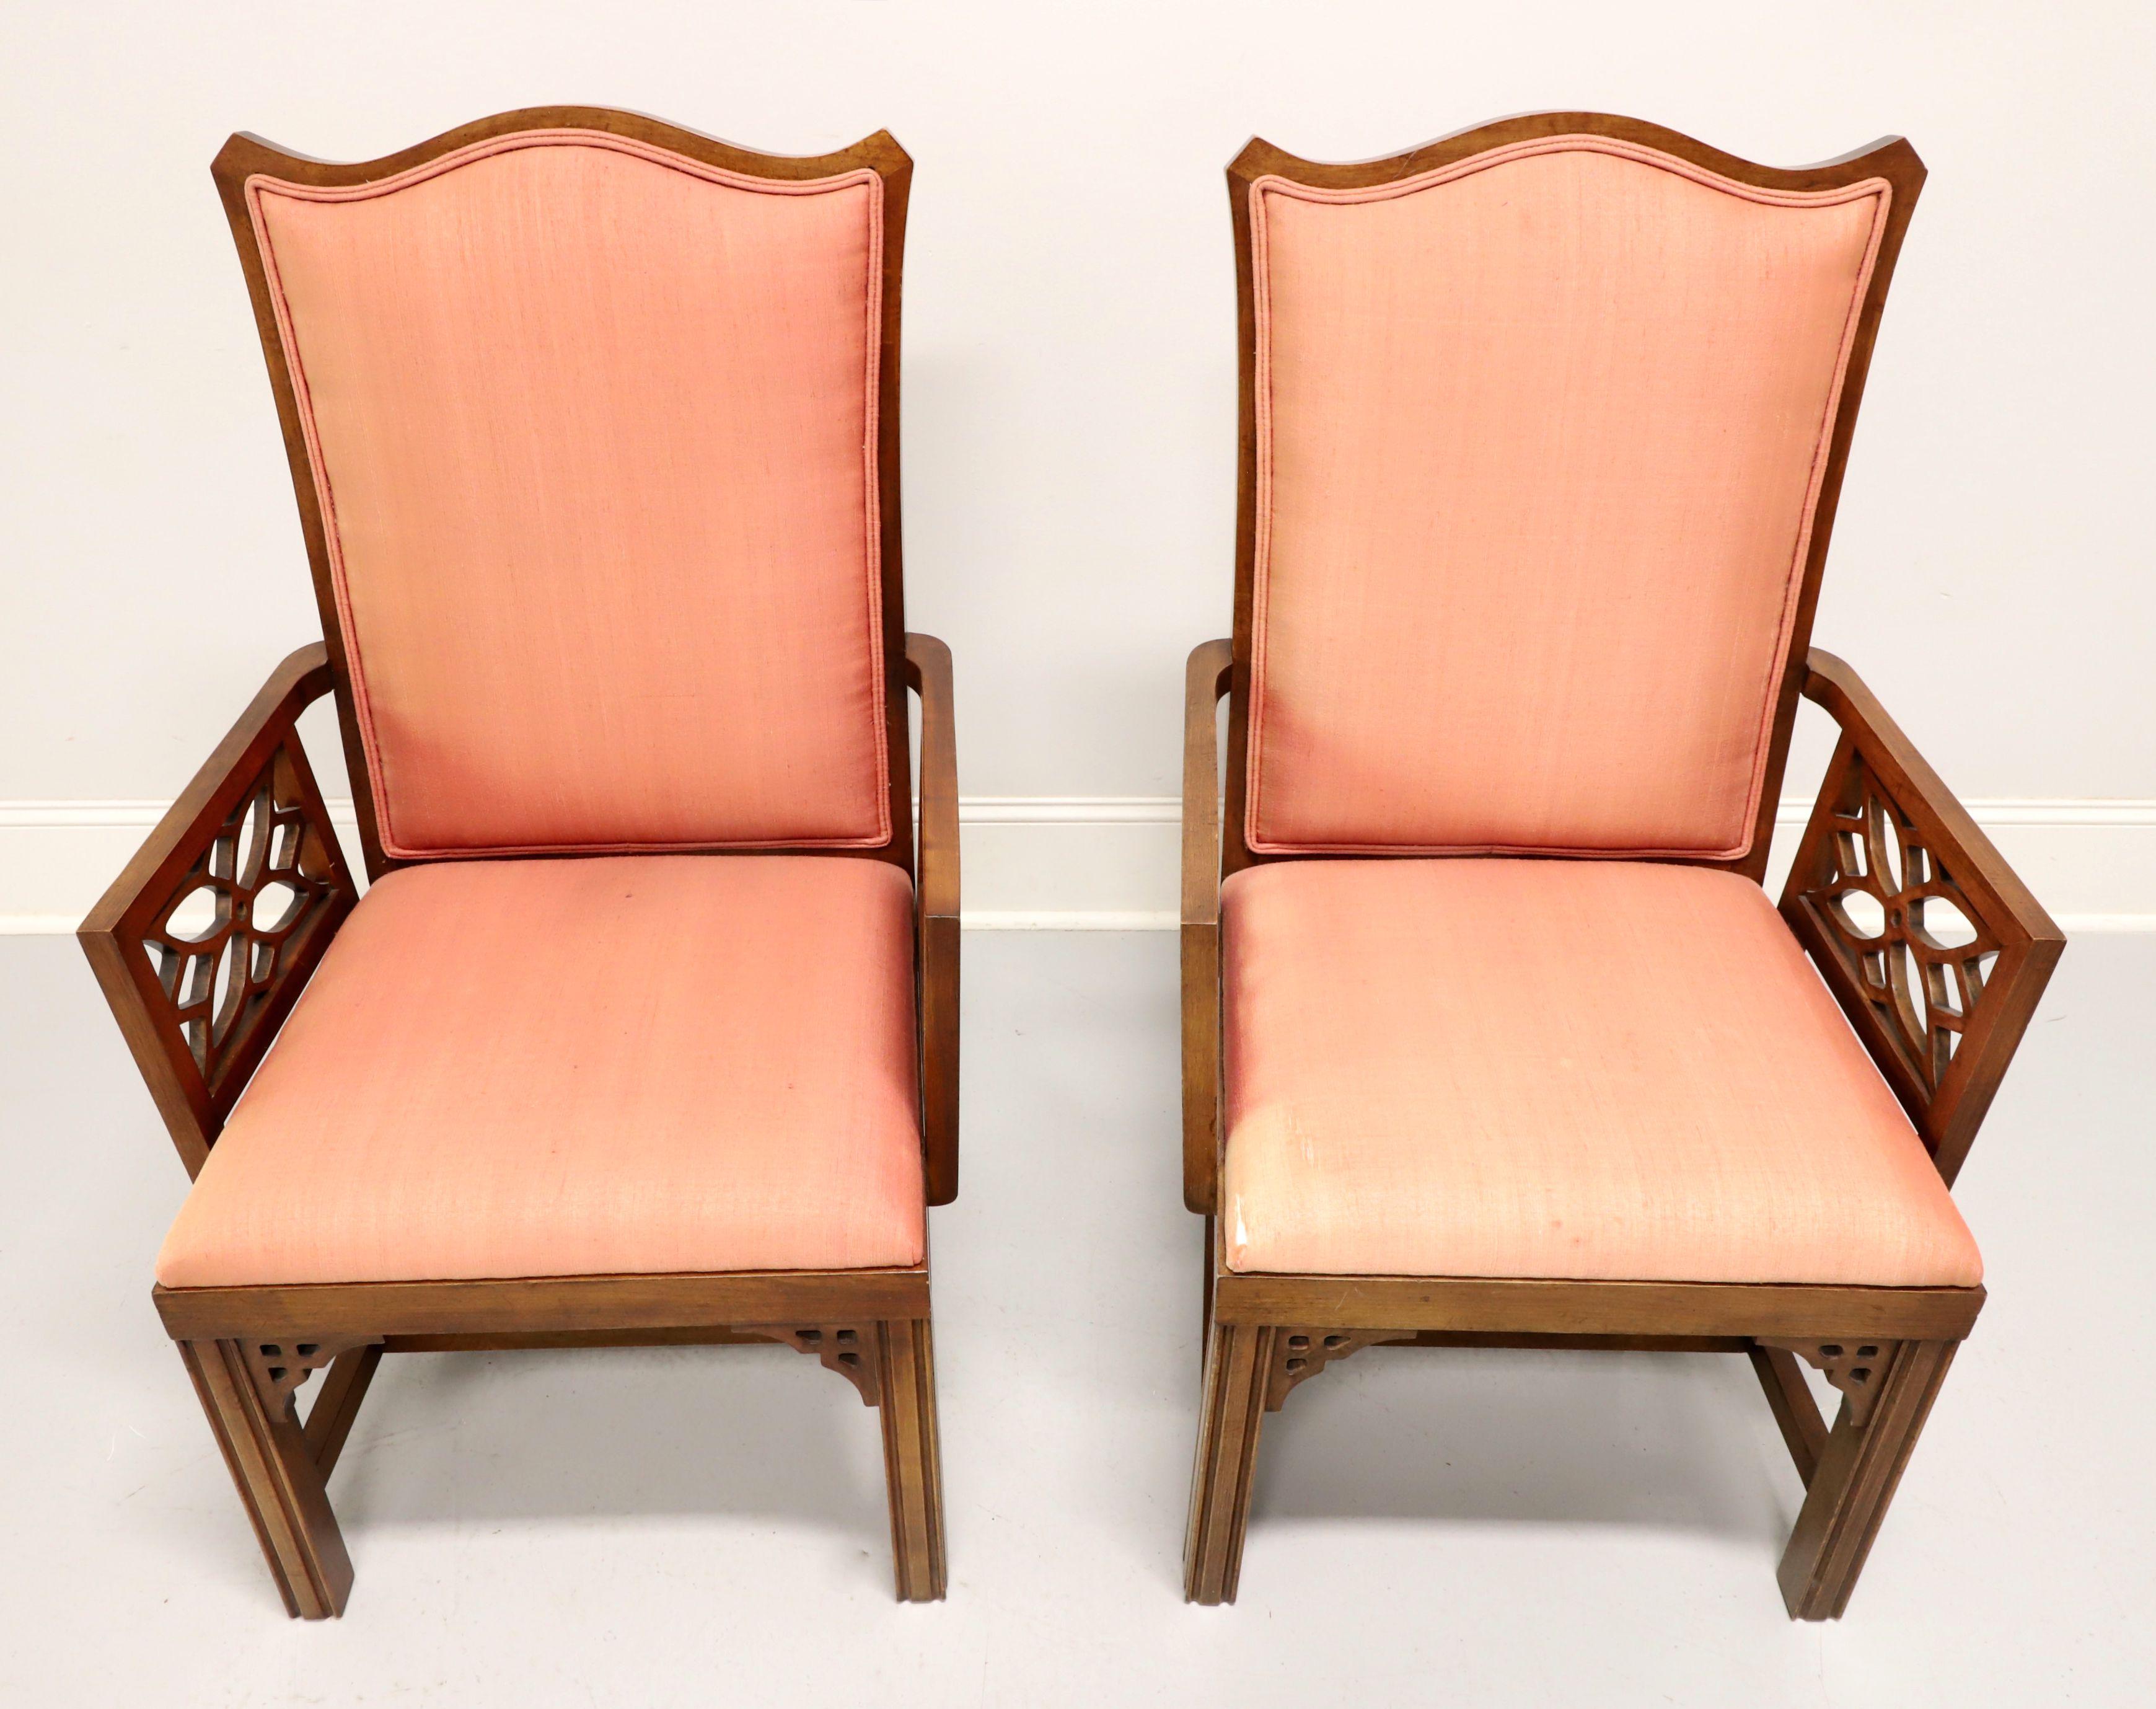 A pair of Asian inspired dining armchairs, unbranded, likely Thomasville or American of Martinsville. Cherry with decorative fretwork accents under apron at corners, carved design to chair back, squared arms with carved design, salmon color fabric